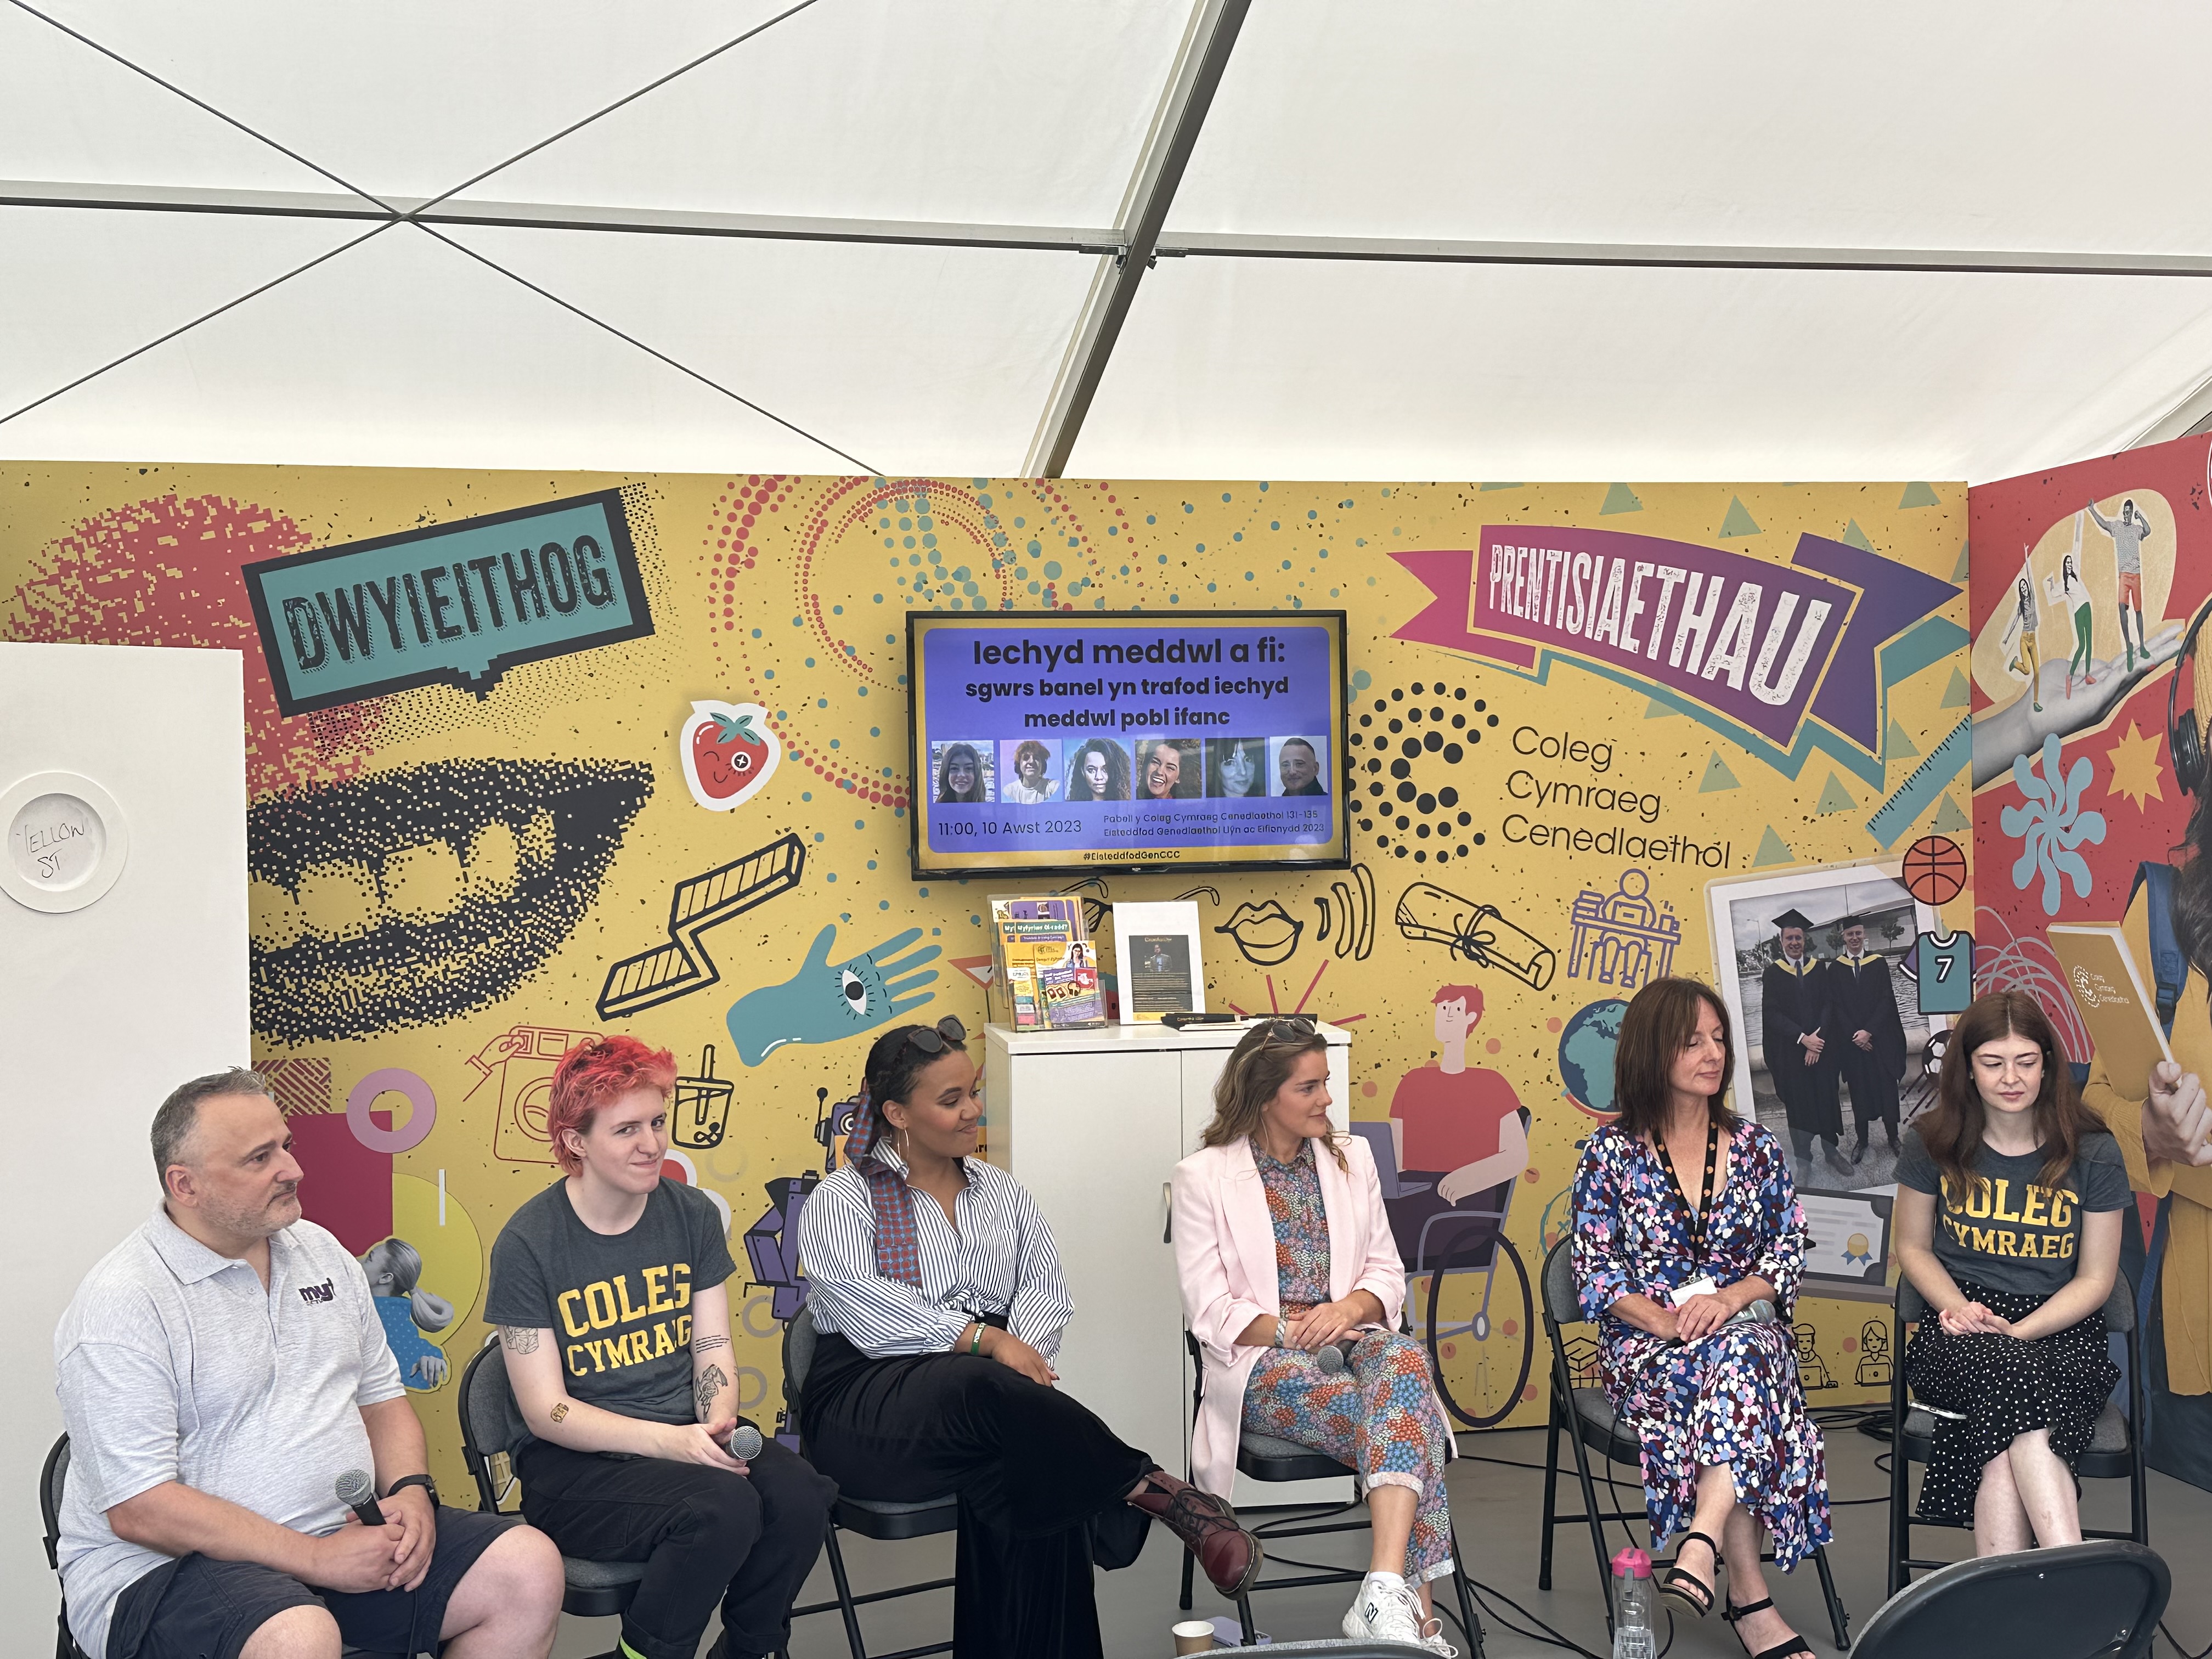 Reagan took part in a discussion panel on mental health organised by the Coleg Cymraeg at the National Eisteddfod